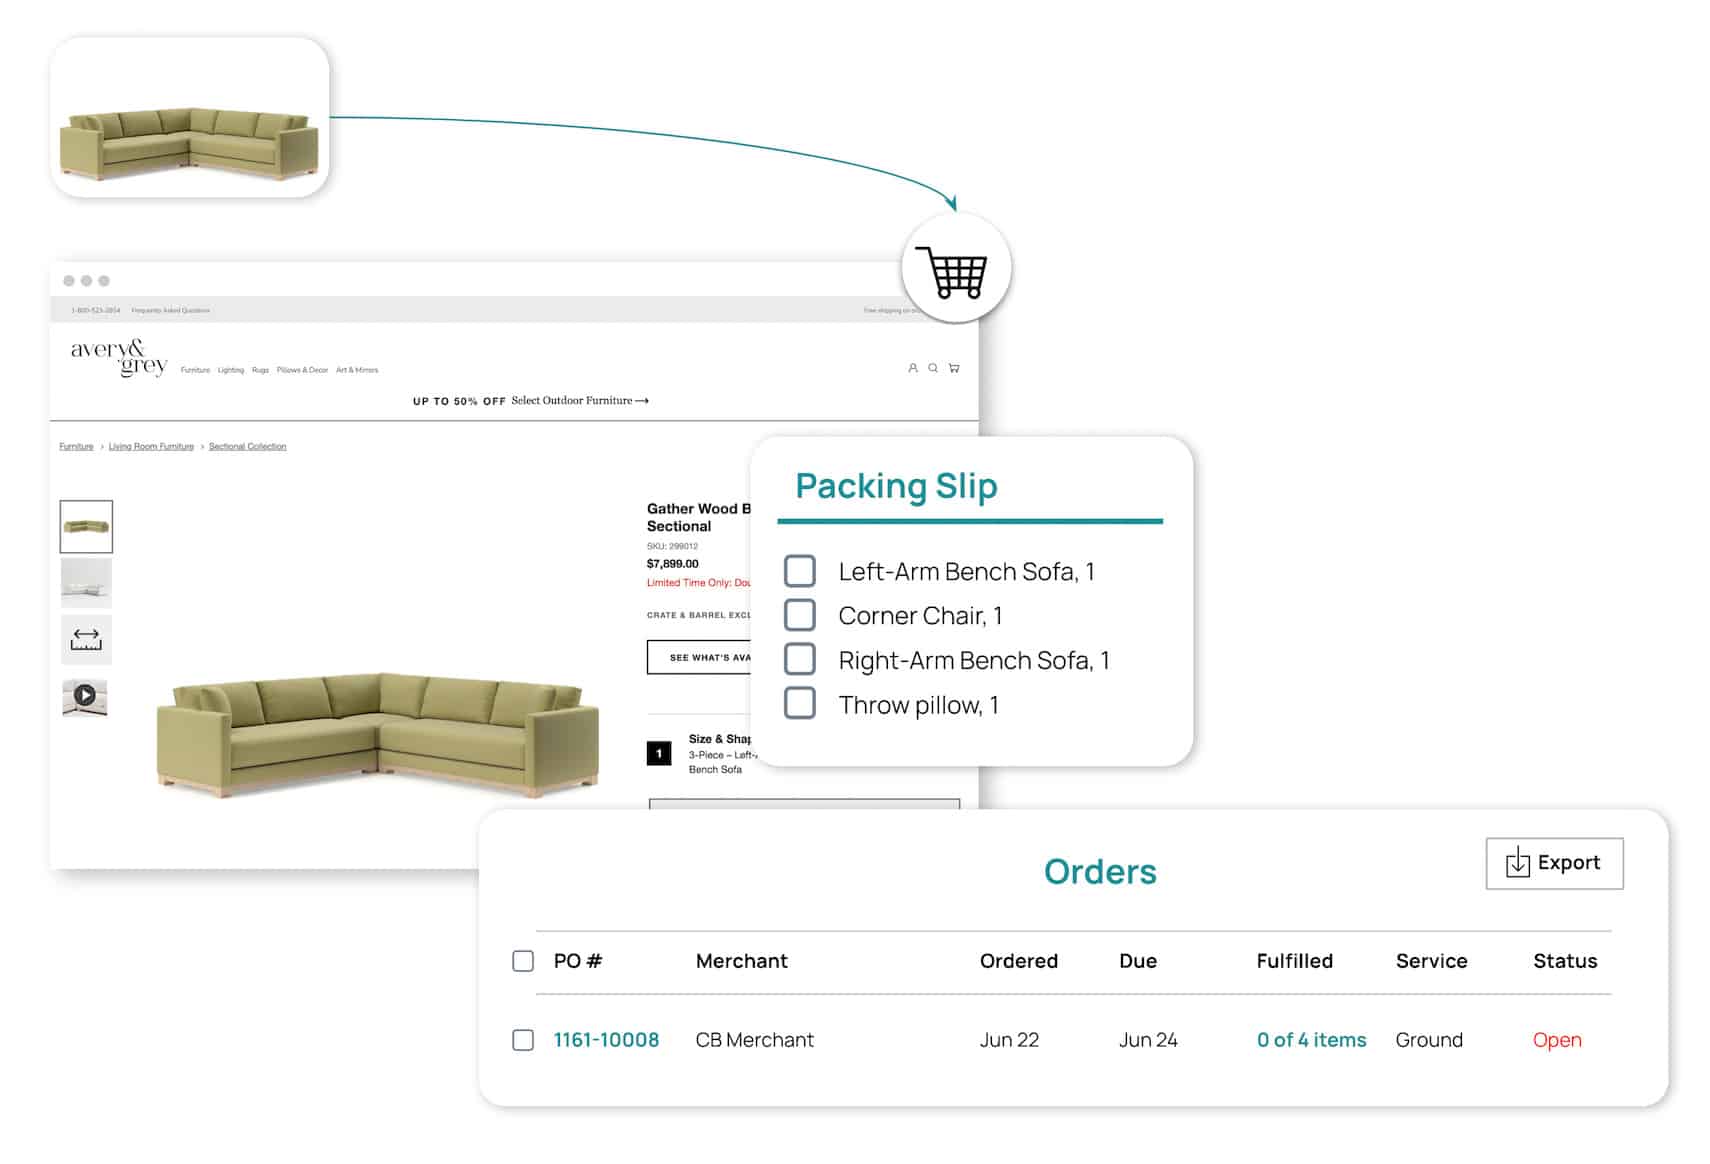 With our August product update, it's easier than ever to share customer orders on fabric Dropship.